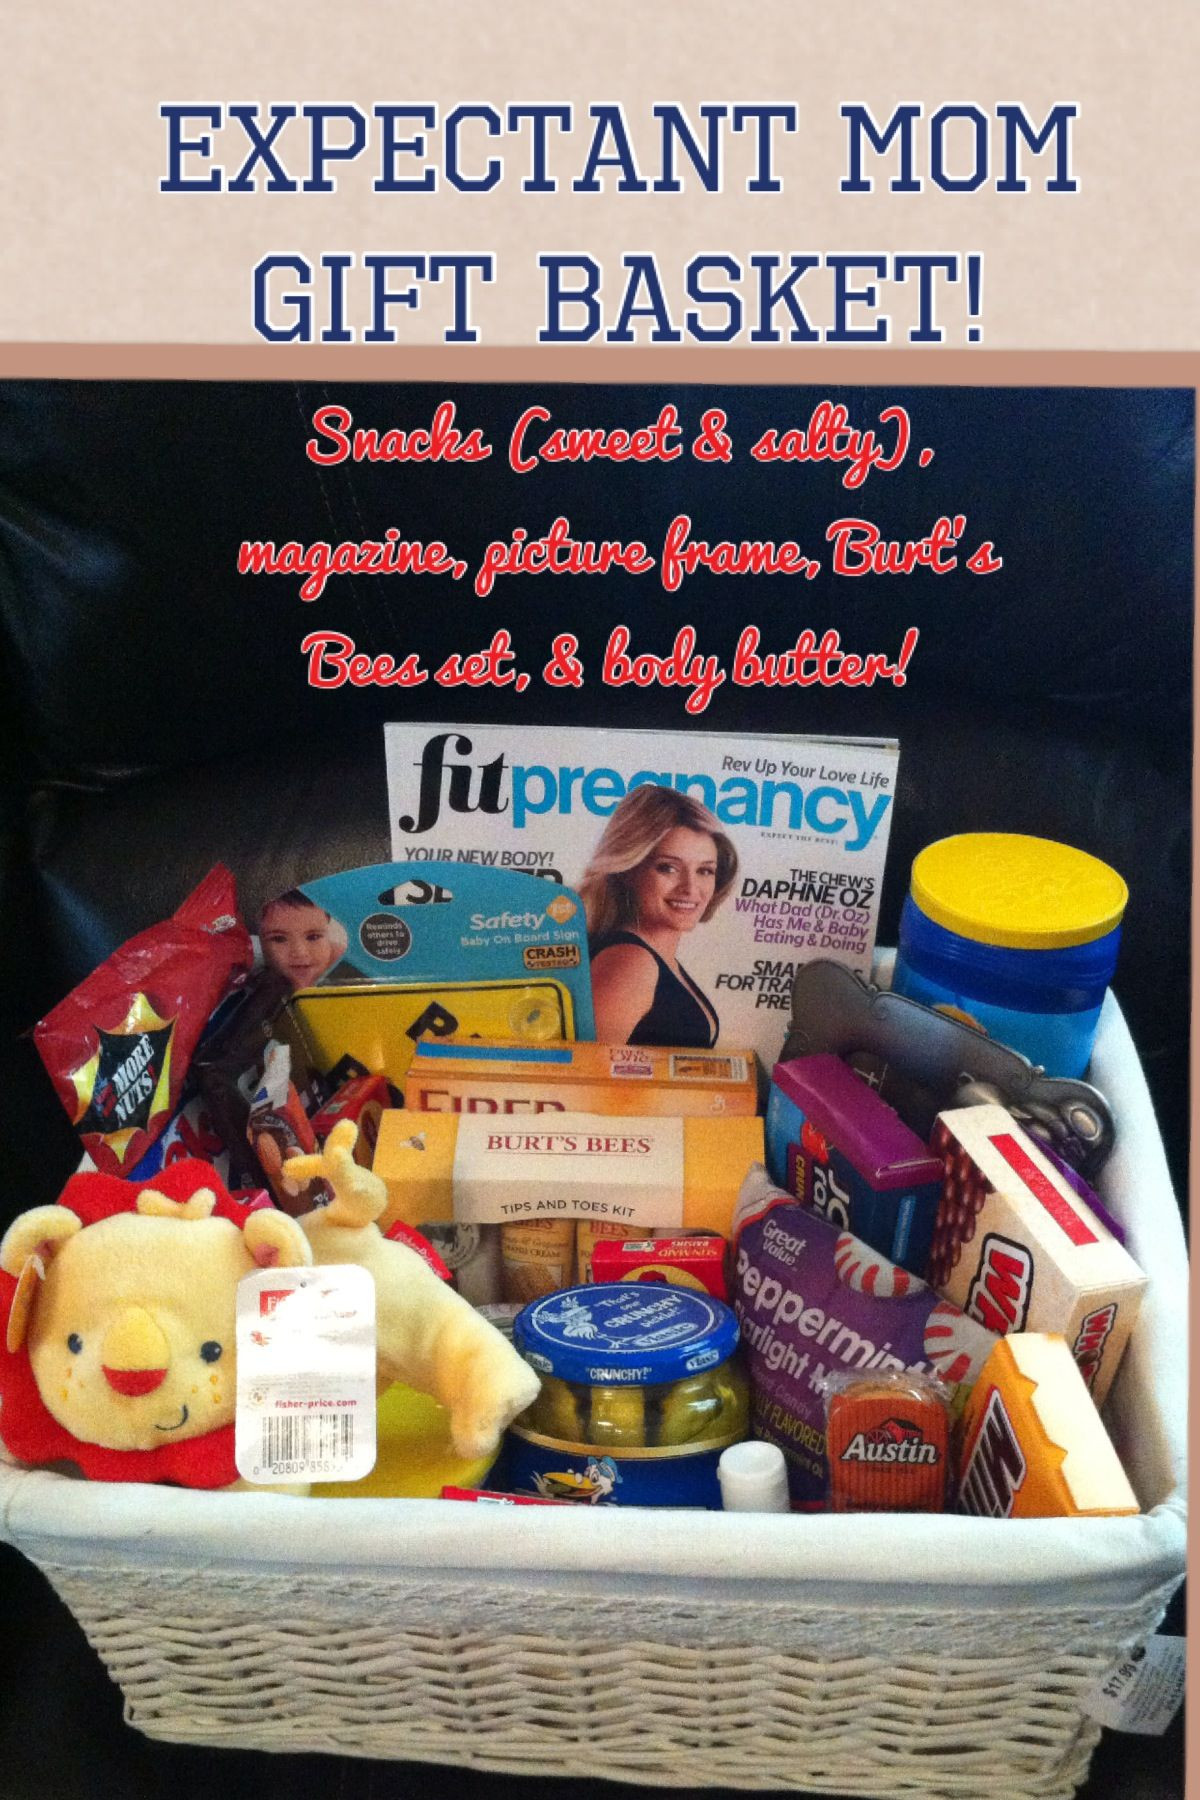 Gift Basket Ideas For Expecting Mom
 Pin on B G Twins